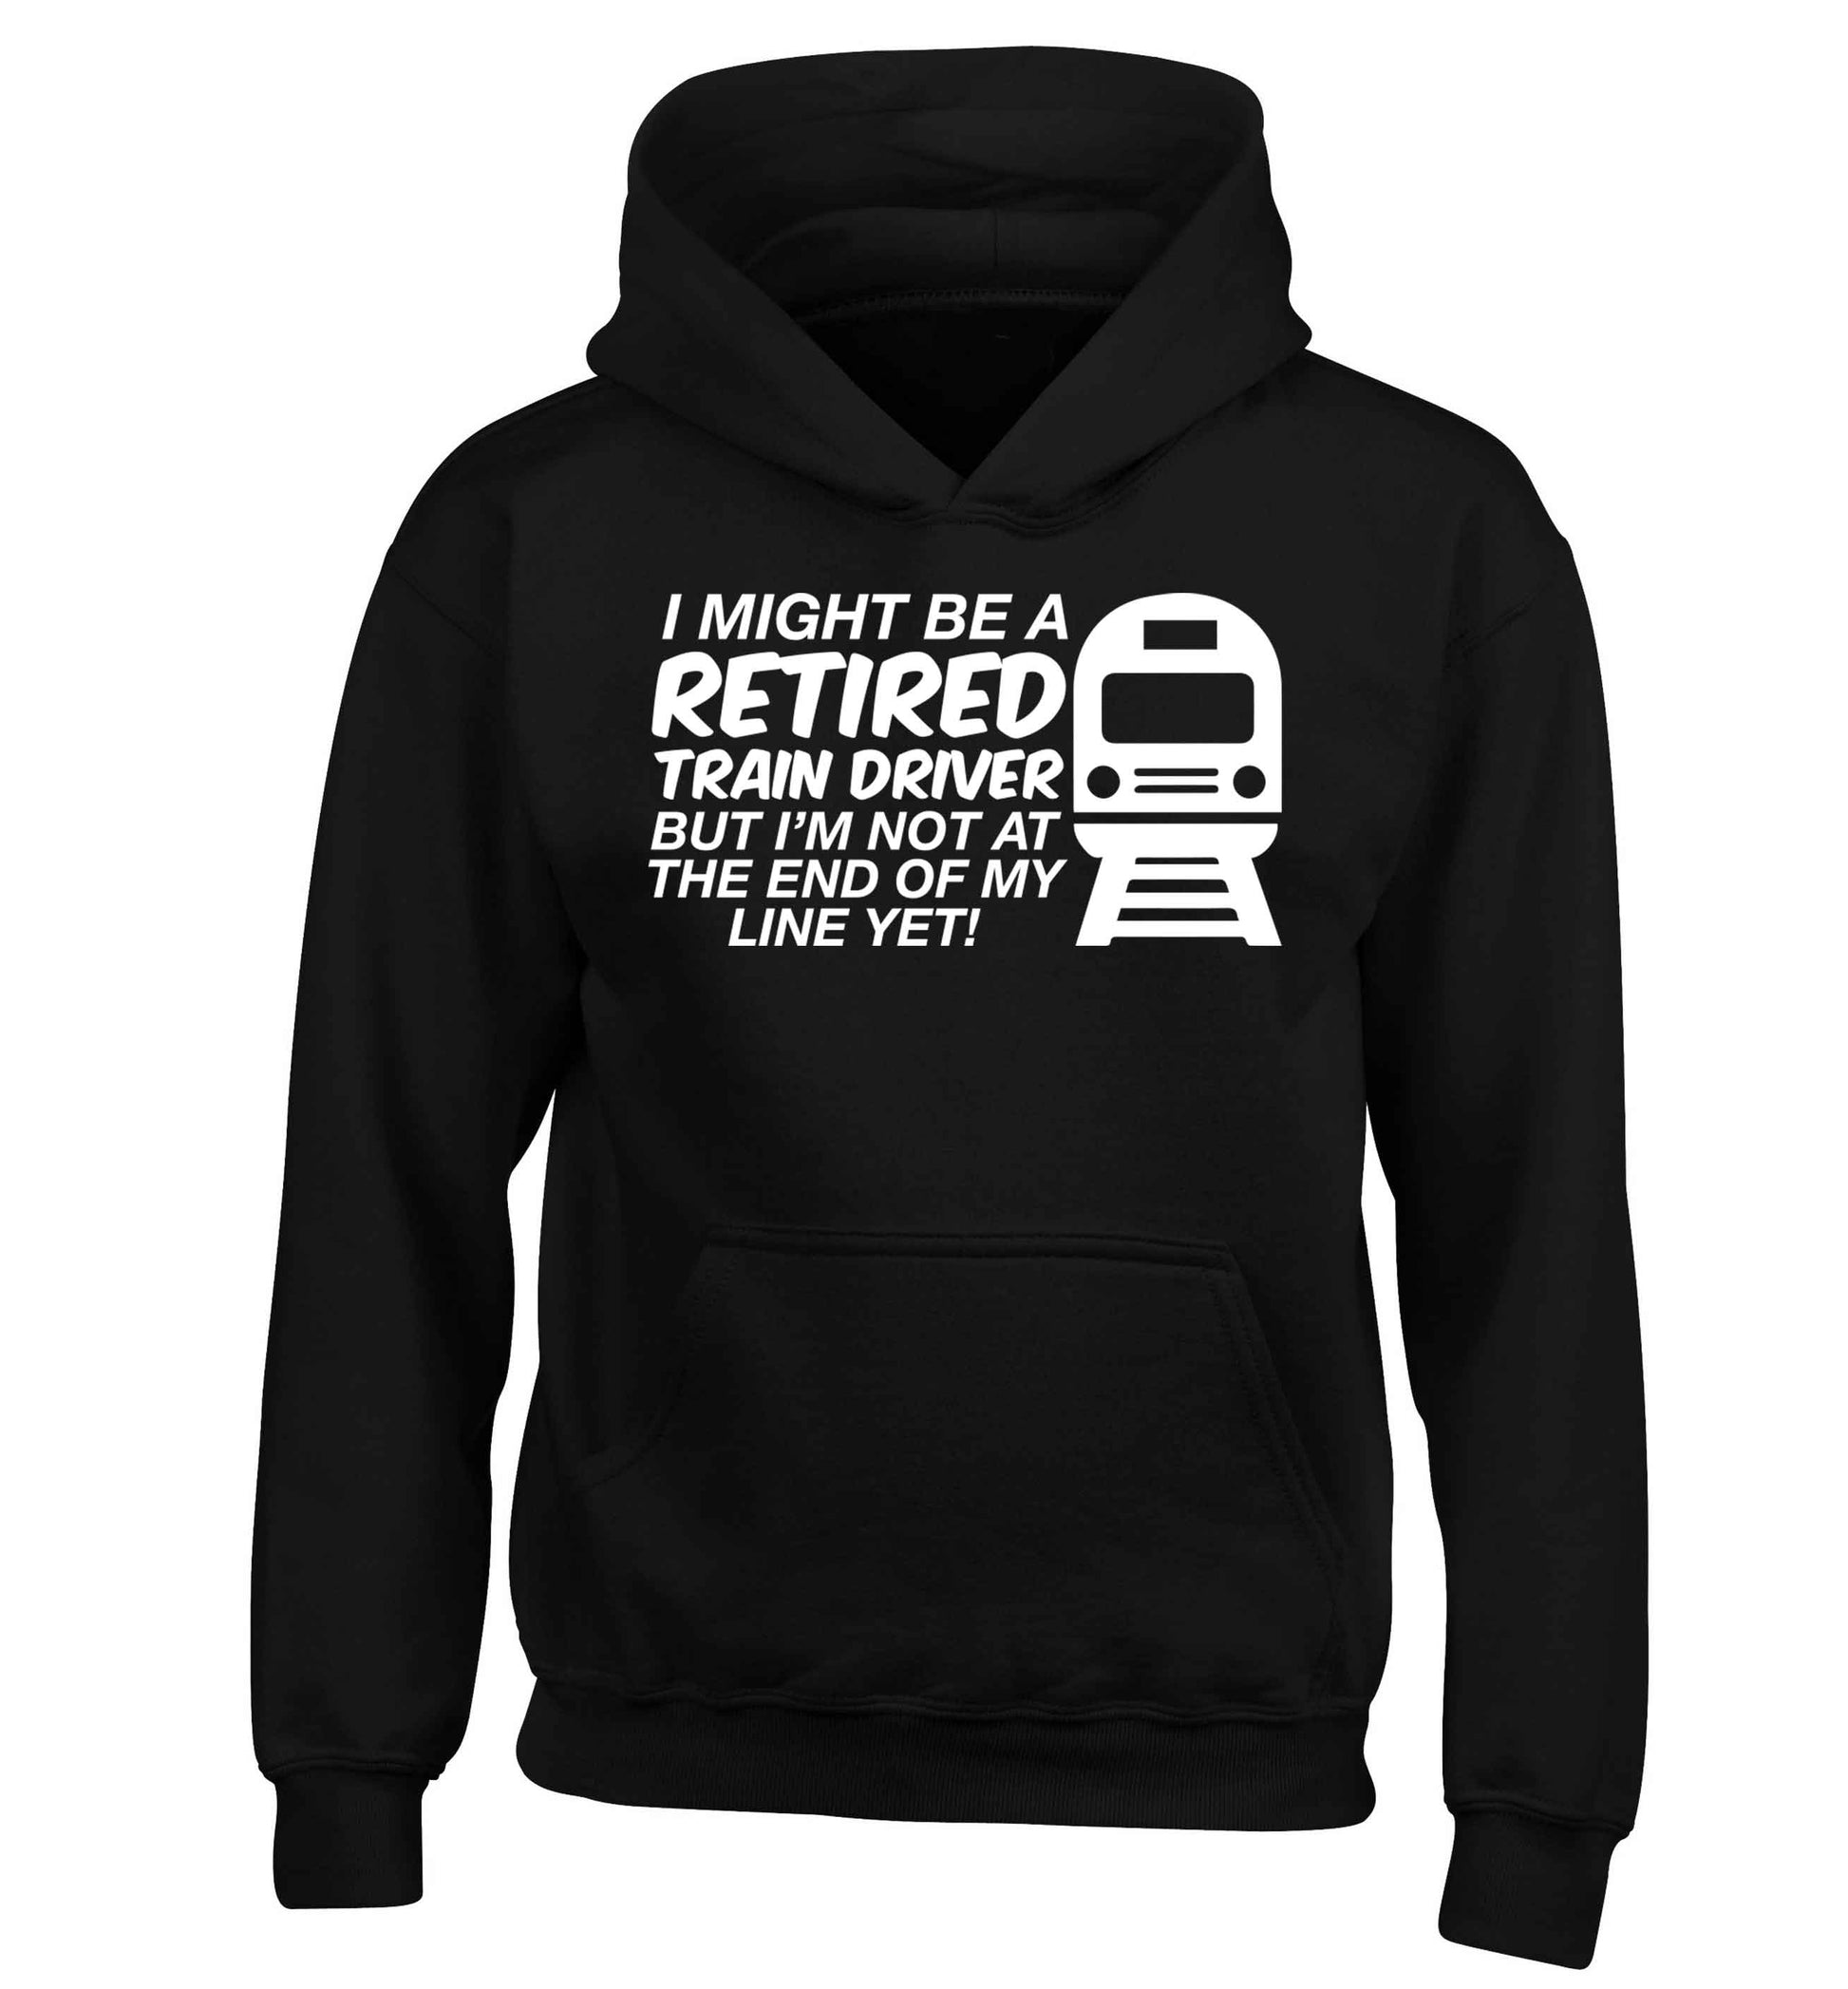 Retired train driver but I'm not at the end of my line yet children's black hoodie 12-13 Years